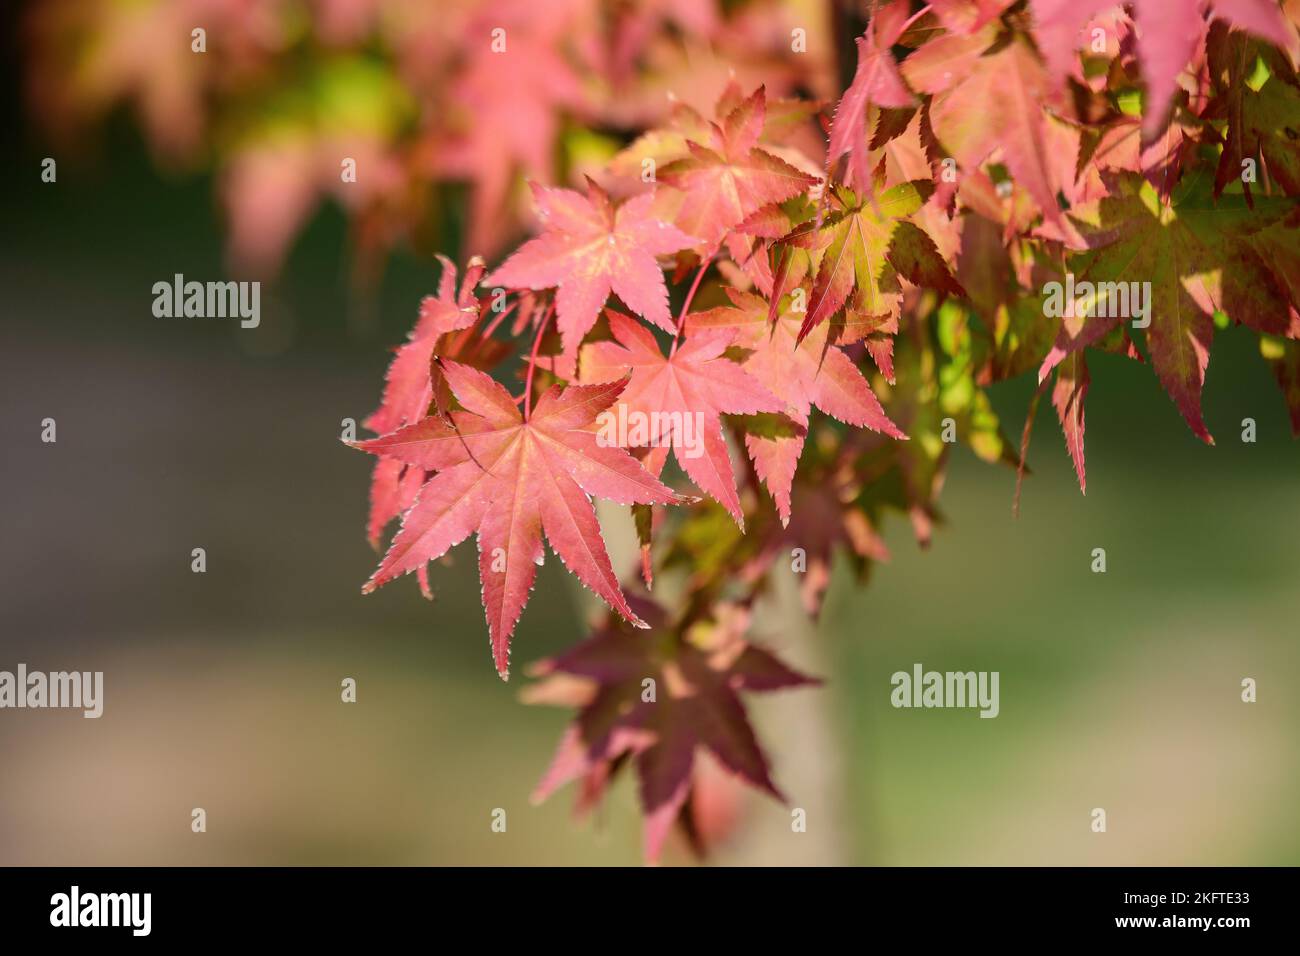 Many orange and red leaves of maple tree colored during the cold autumn days in a botanical garden, beautiful outdoor background photographed with sof Stock Photo